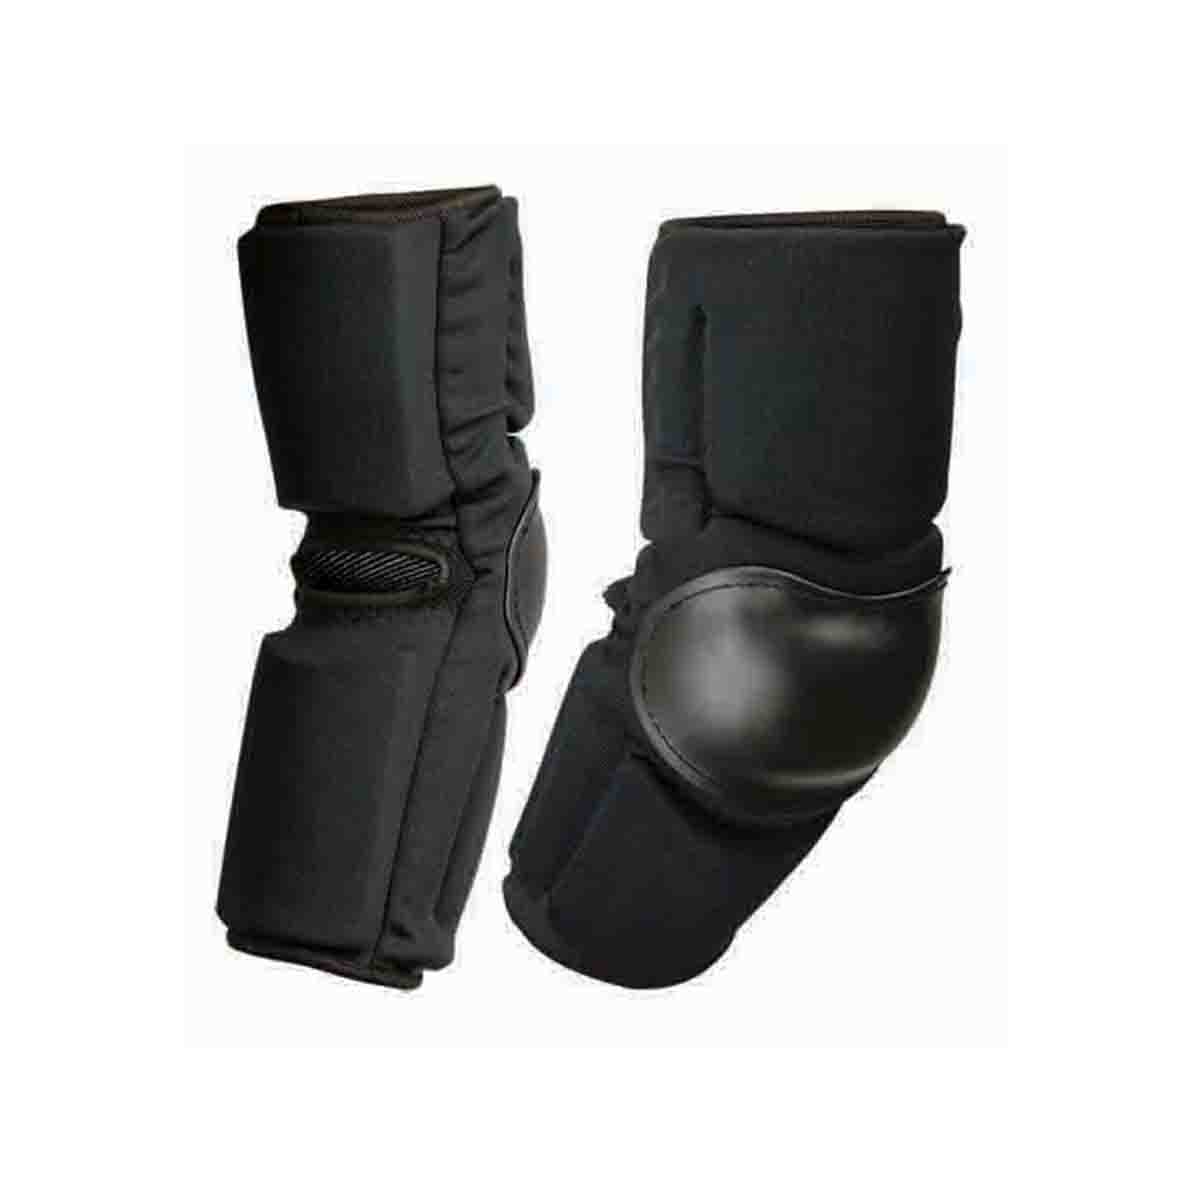 Z-Force Elbow Guards